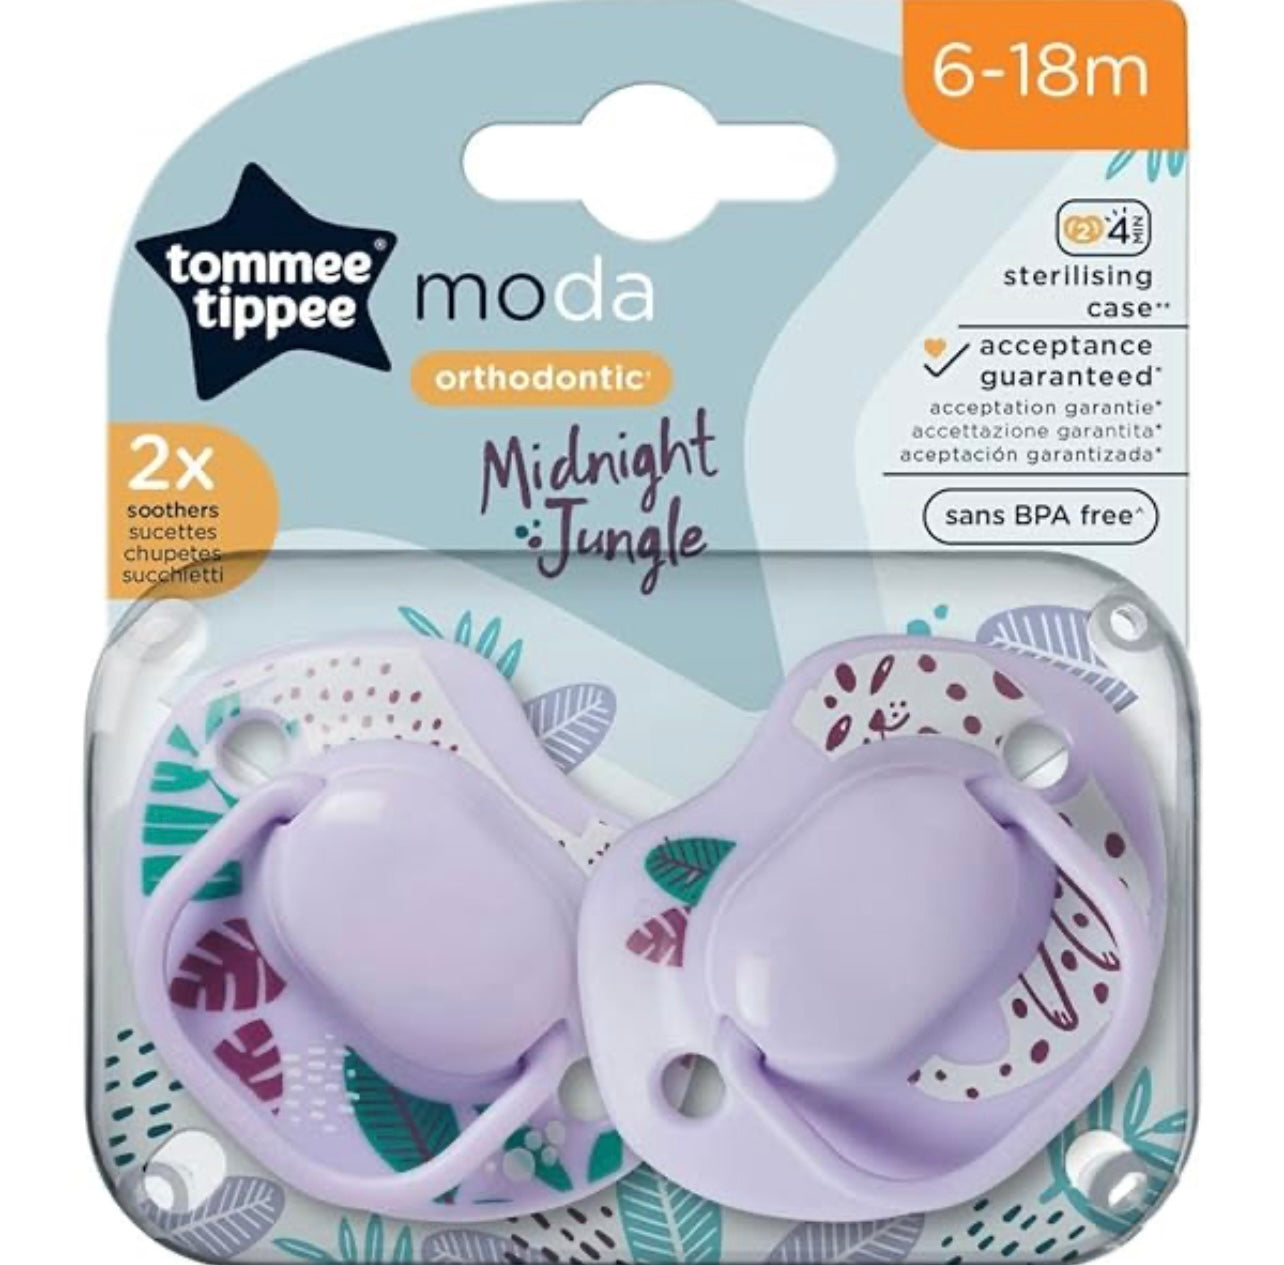 Tommee Tippee 6-18m Moda Midnight Jungle Soothers Pacifiers purple